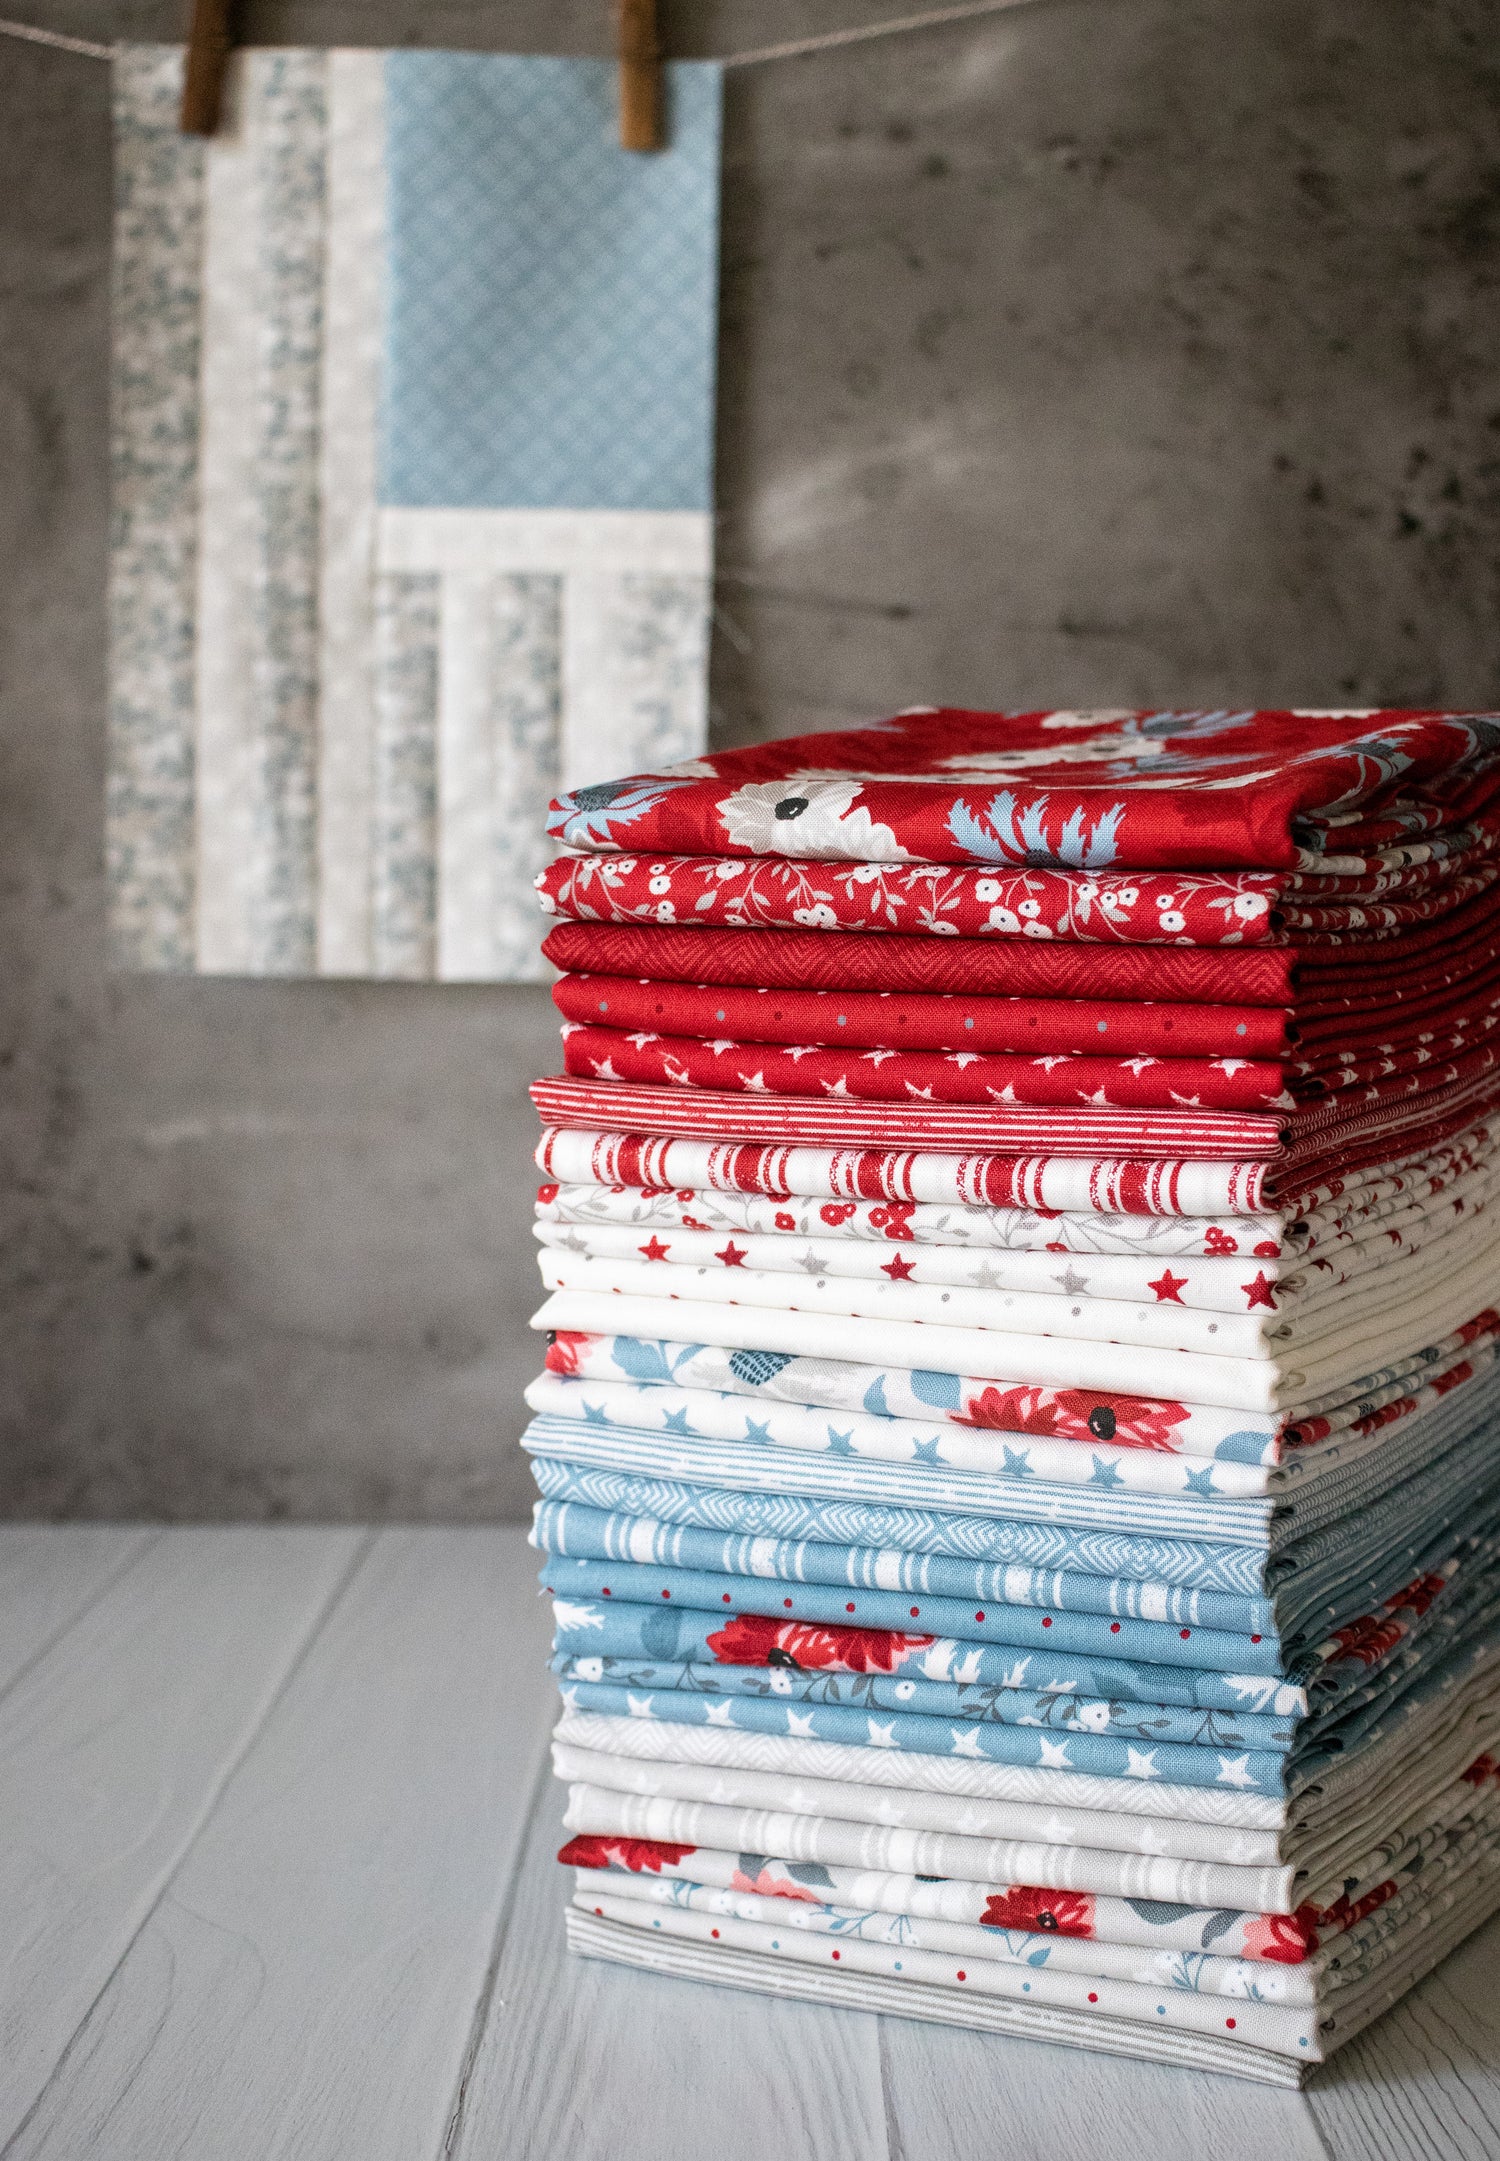 Old Glory by Lella Boutique for Moda Fabrics